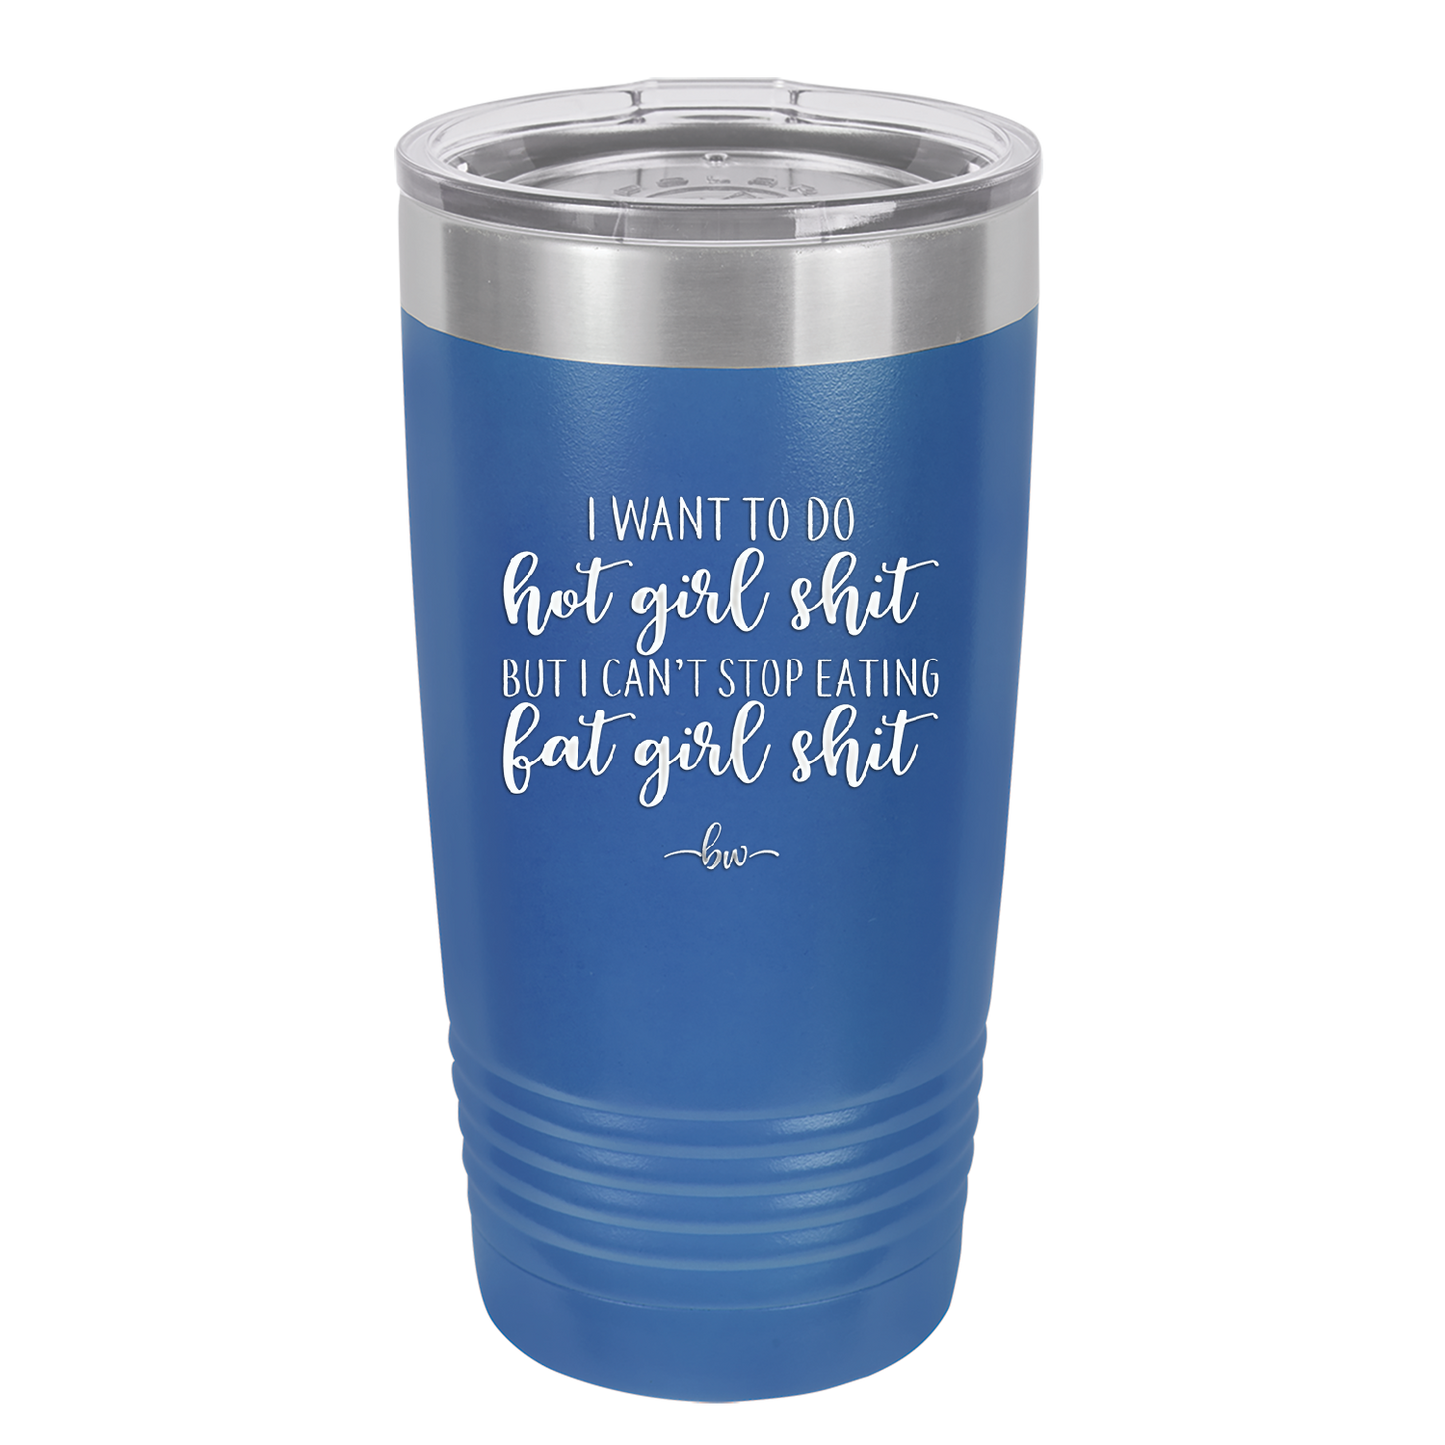 I Want to Do Hot Girl Shit But I Can't Stop Eating Fat Girl Shit - Laser Engraved Stainless Steel Drinkware - 2349 -